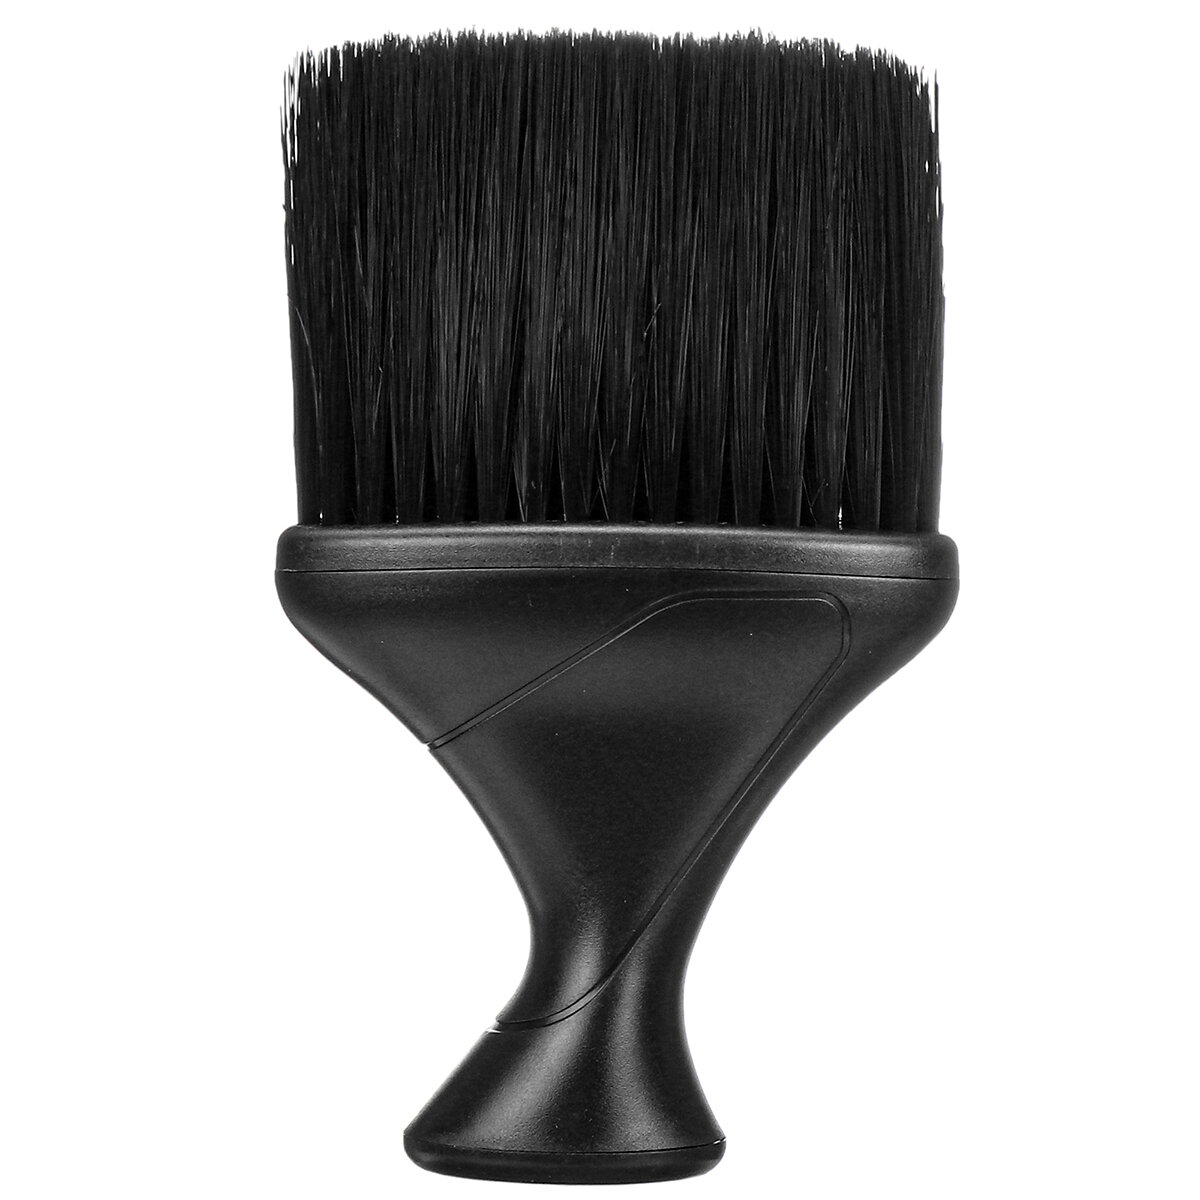 

Soft Neck Duster Brush Salon Hairdressing Hair Cutting Barber Cleaning Tool